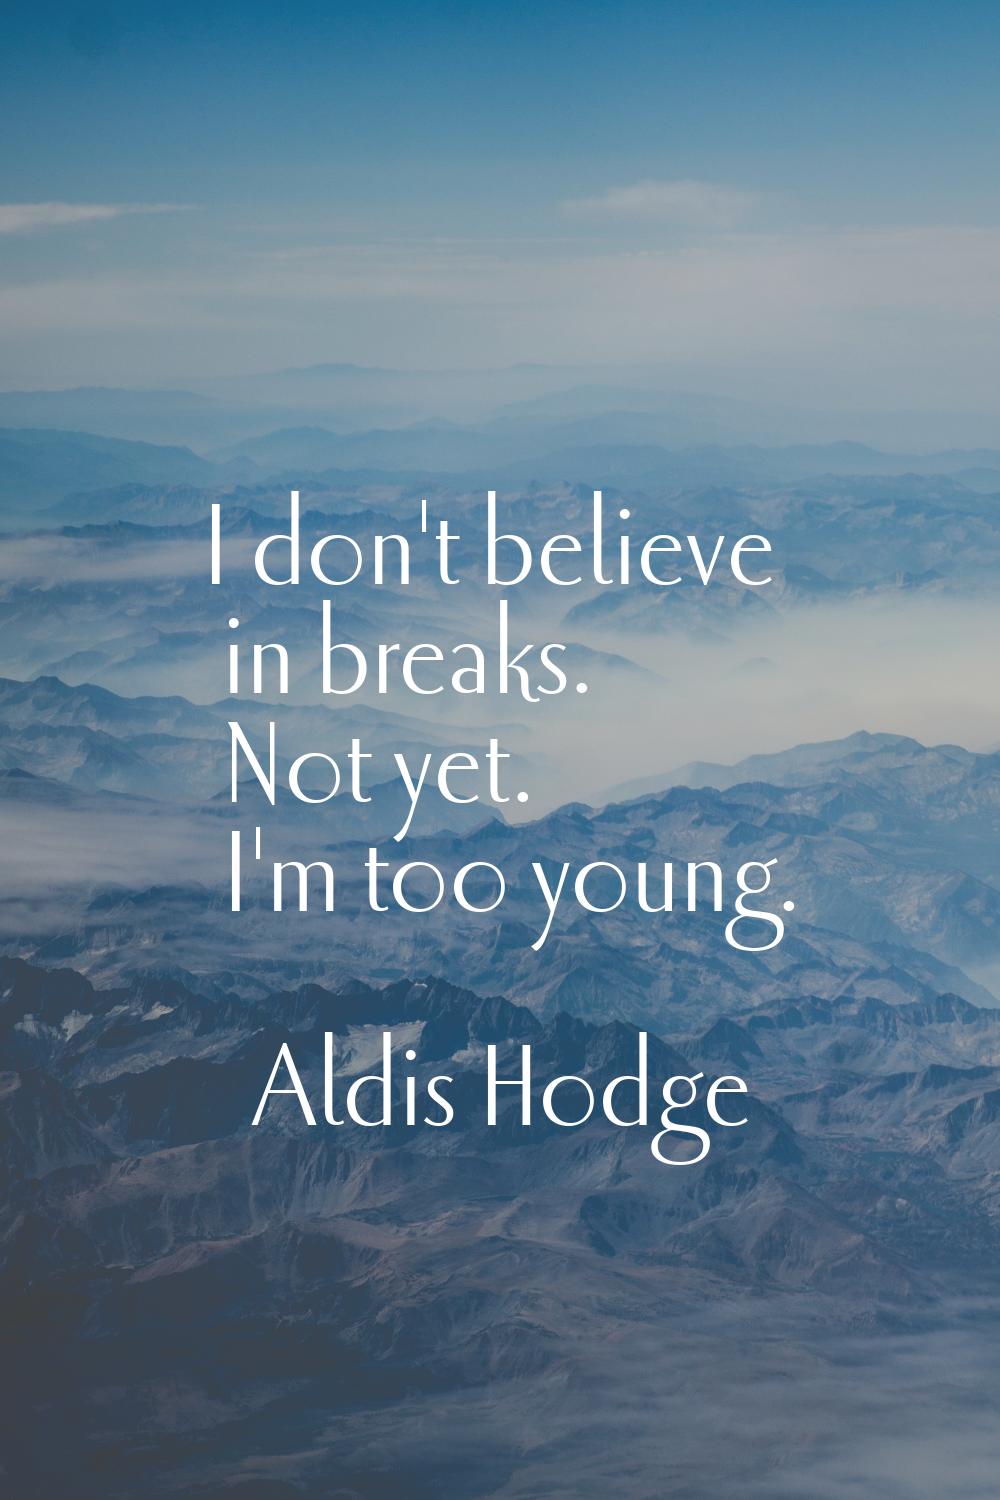 I don't believe in breaks. Not yet. I'm too young.